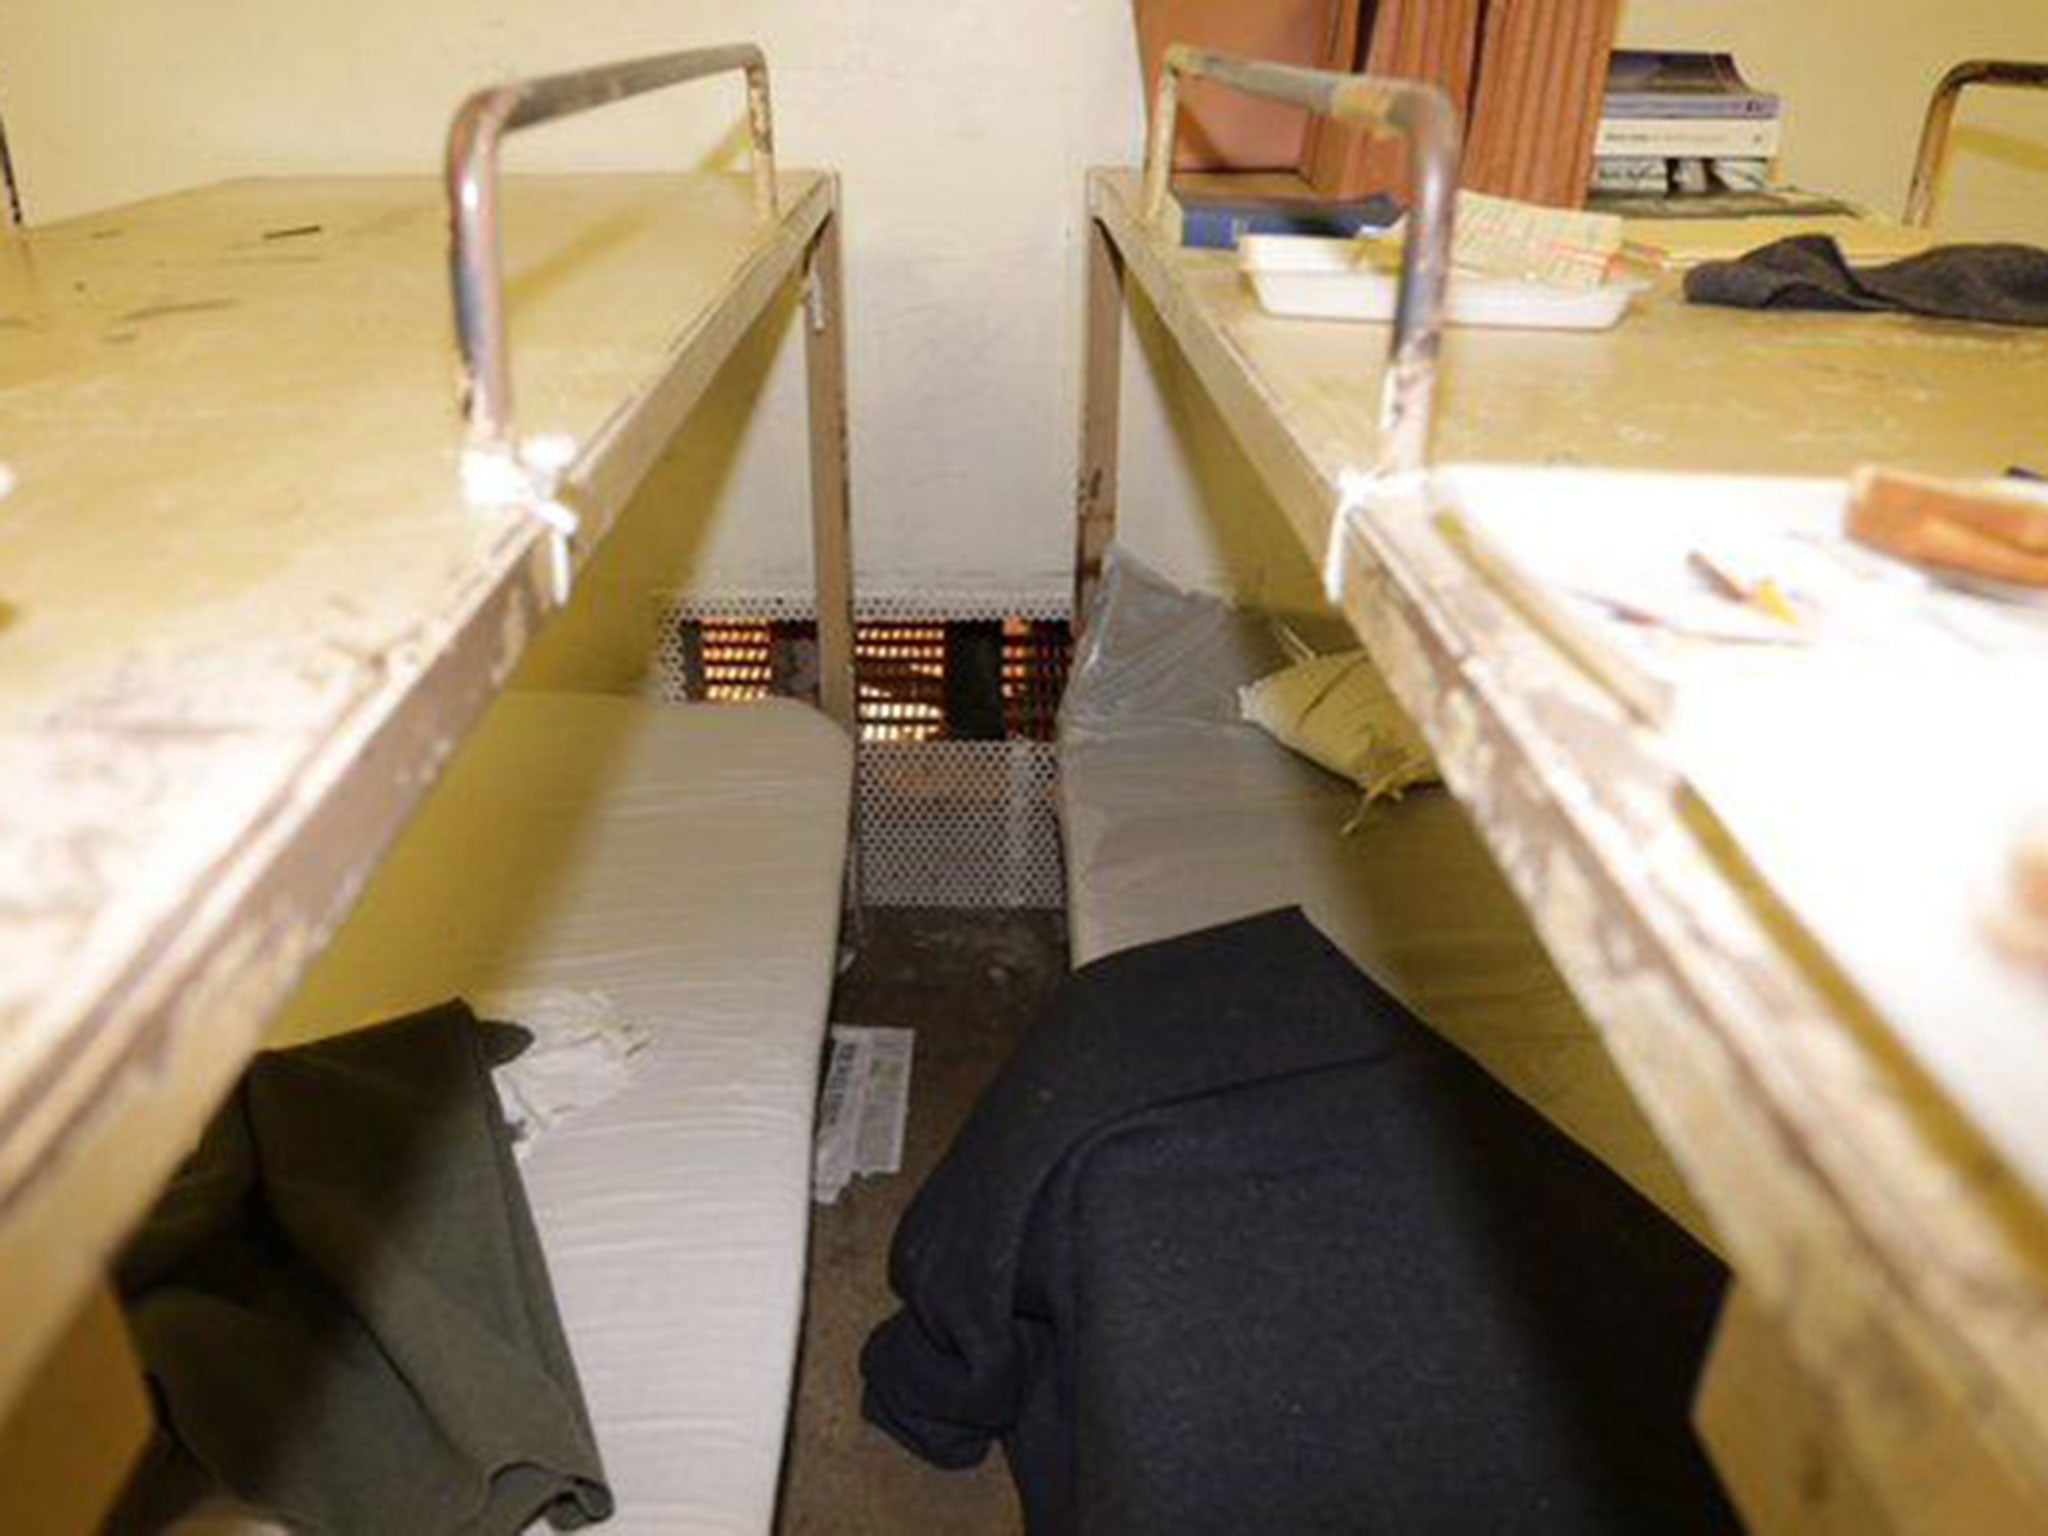 The inmates cut the steel screen between bunk beds as part of their escape plan